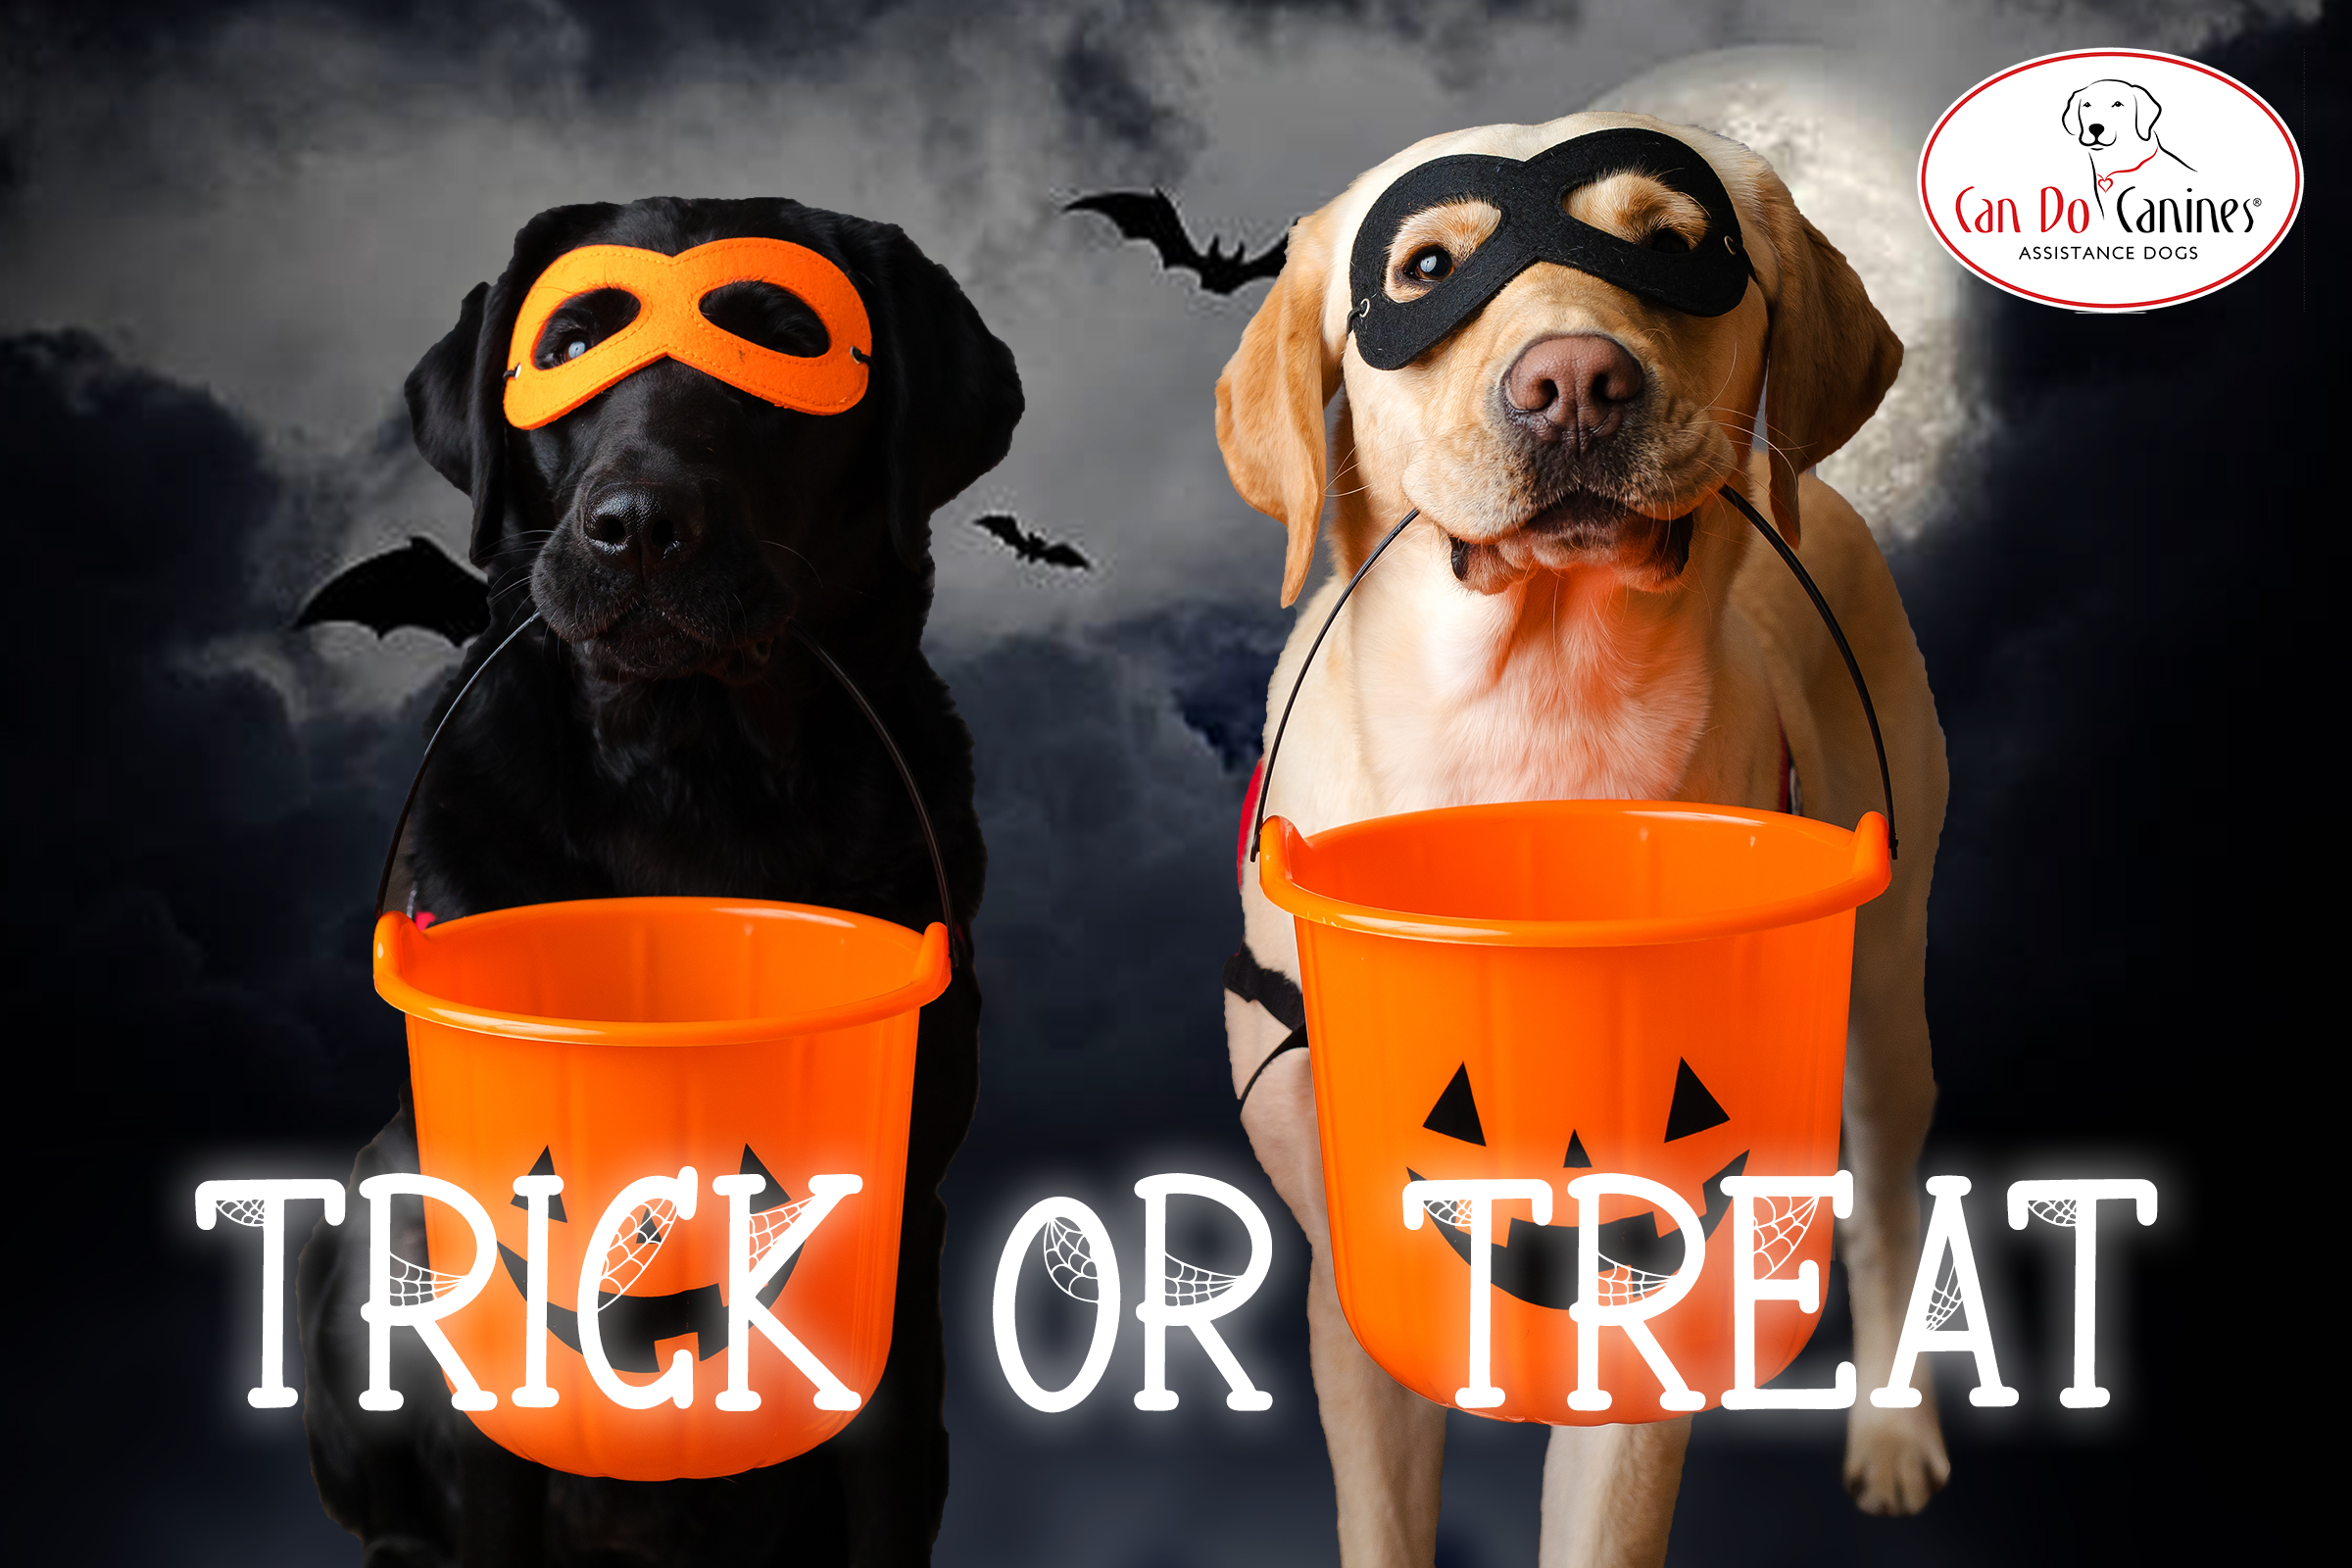 Two dogs, black and yellow Lab, are posing with an orange treat bucket in their mouths.